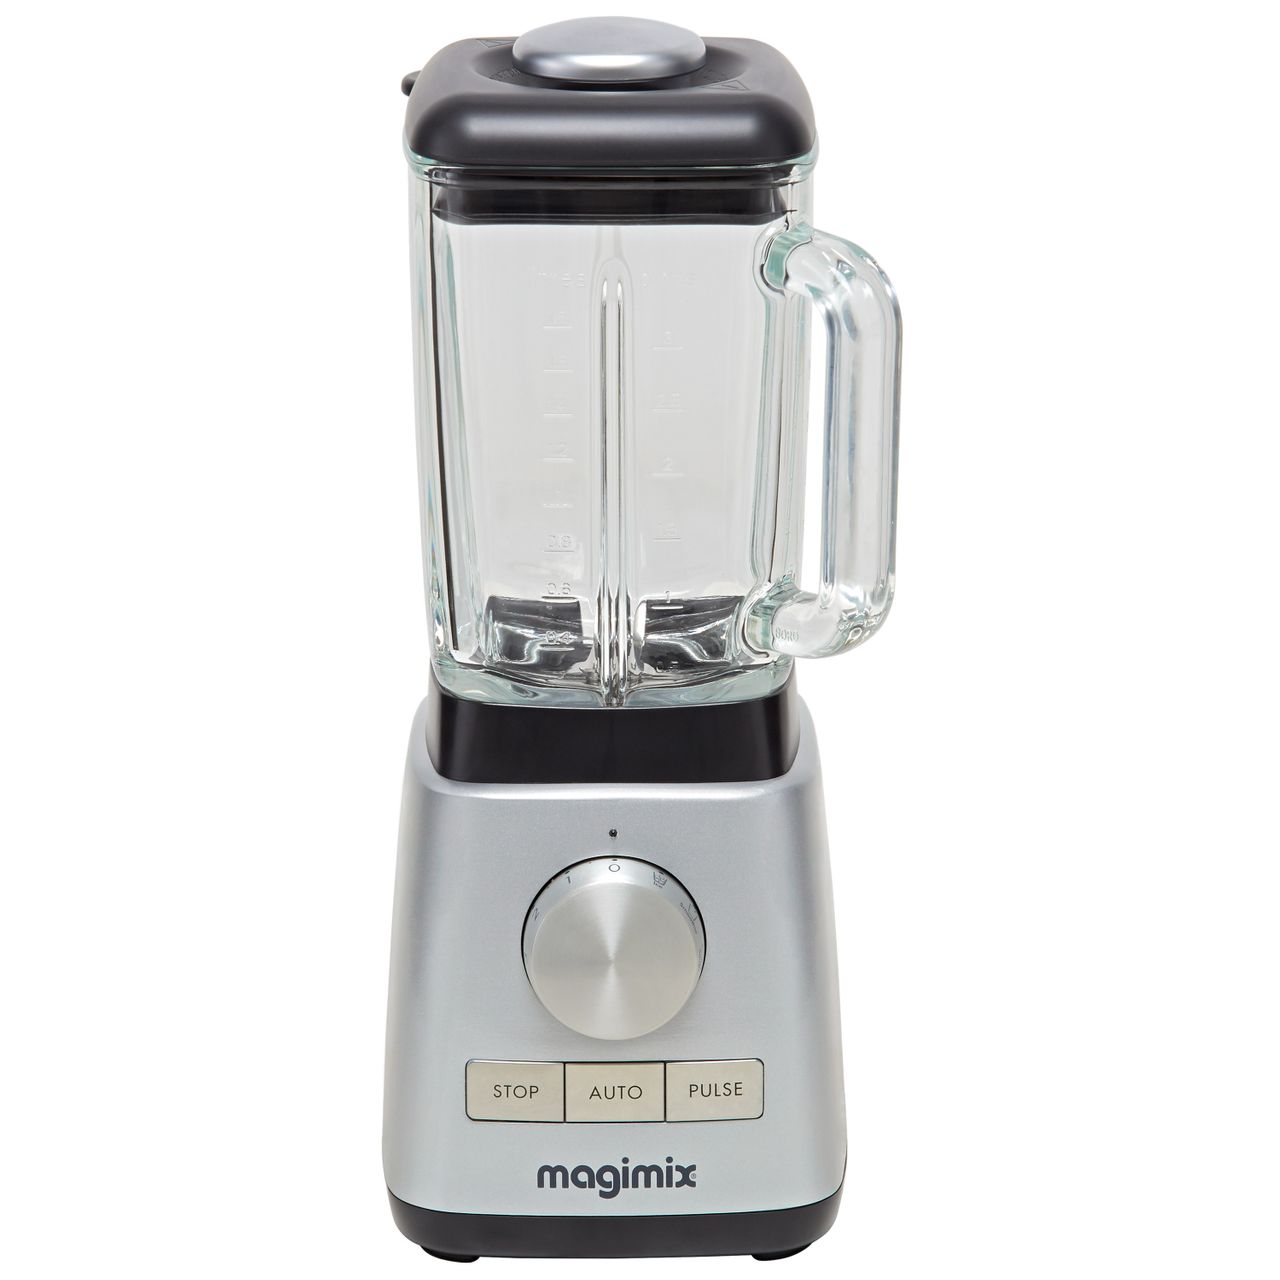 Magimix Le Blender 11619 with 4 Accessories Review